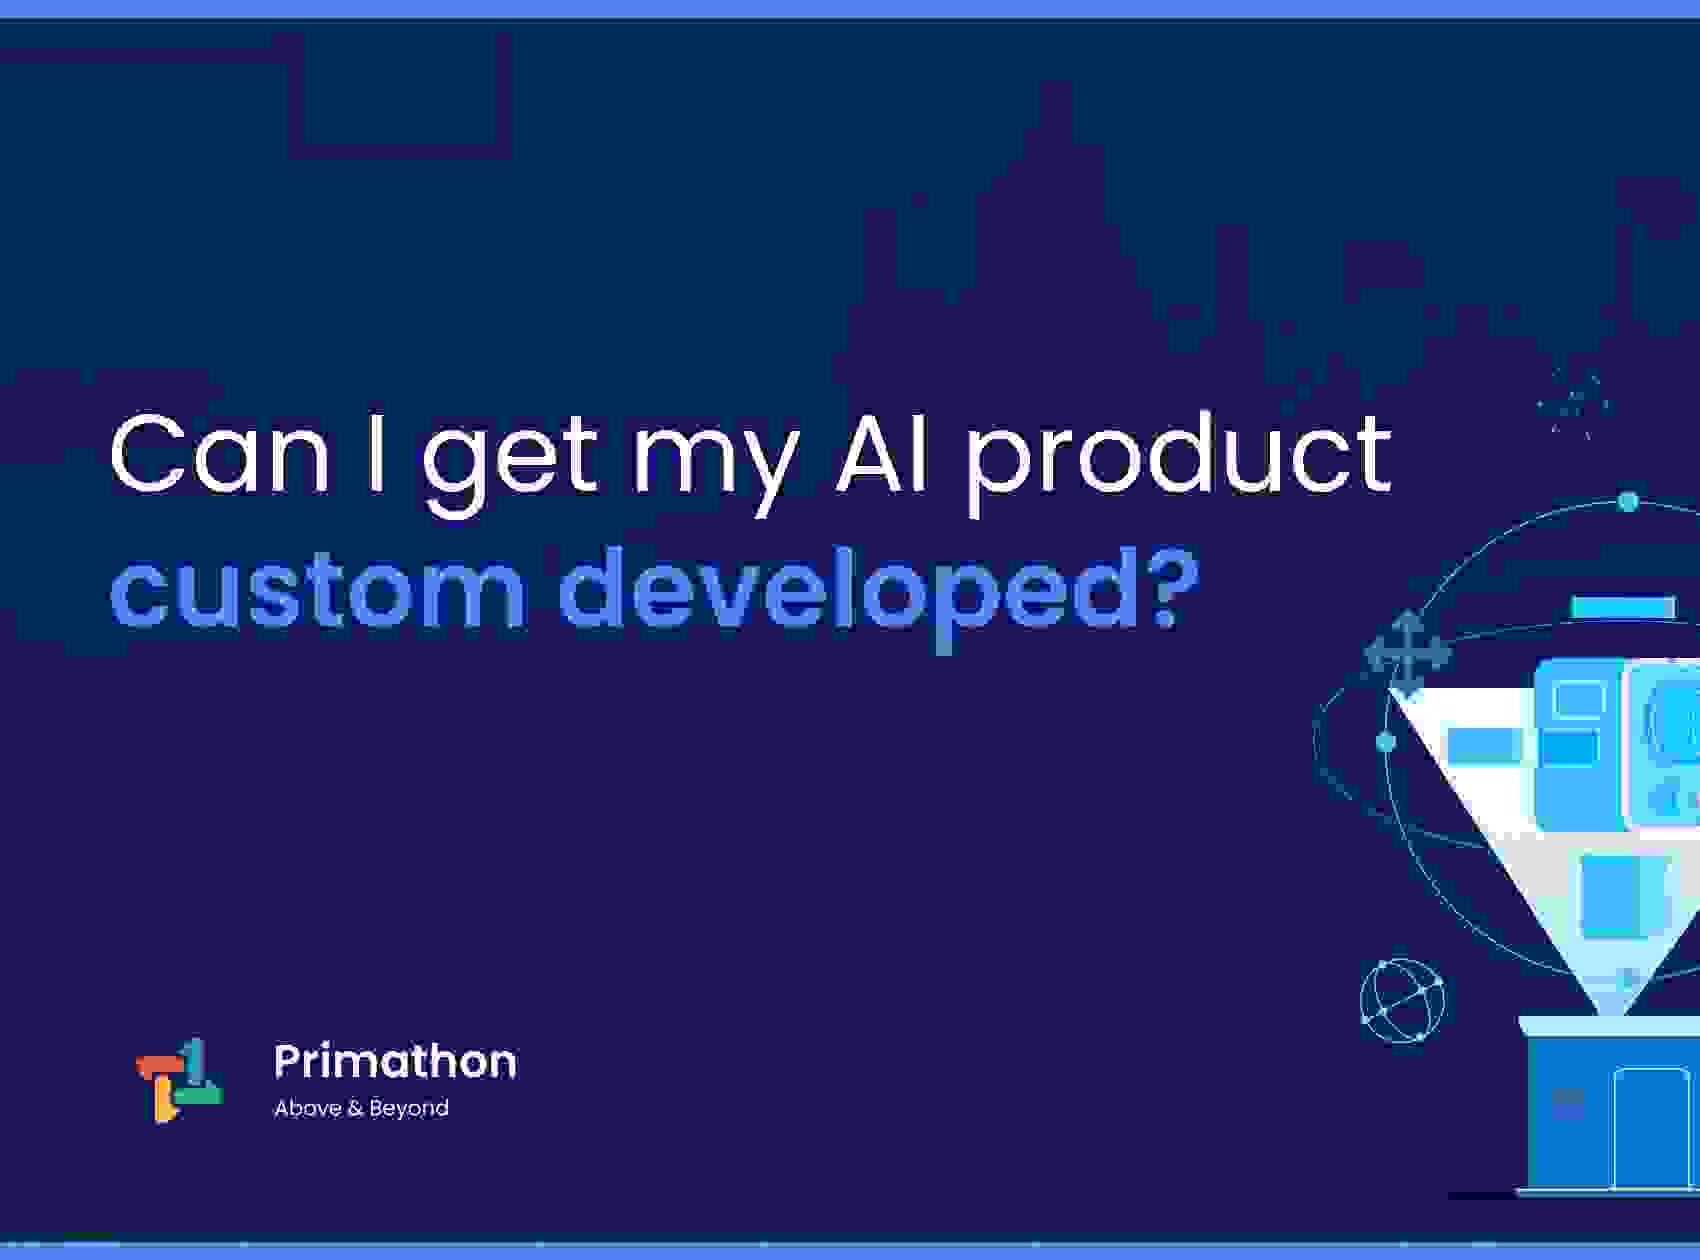 Can I get my AI product custom developed?